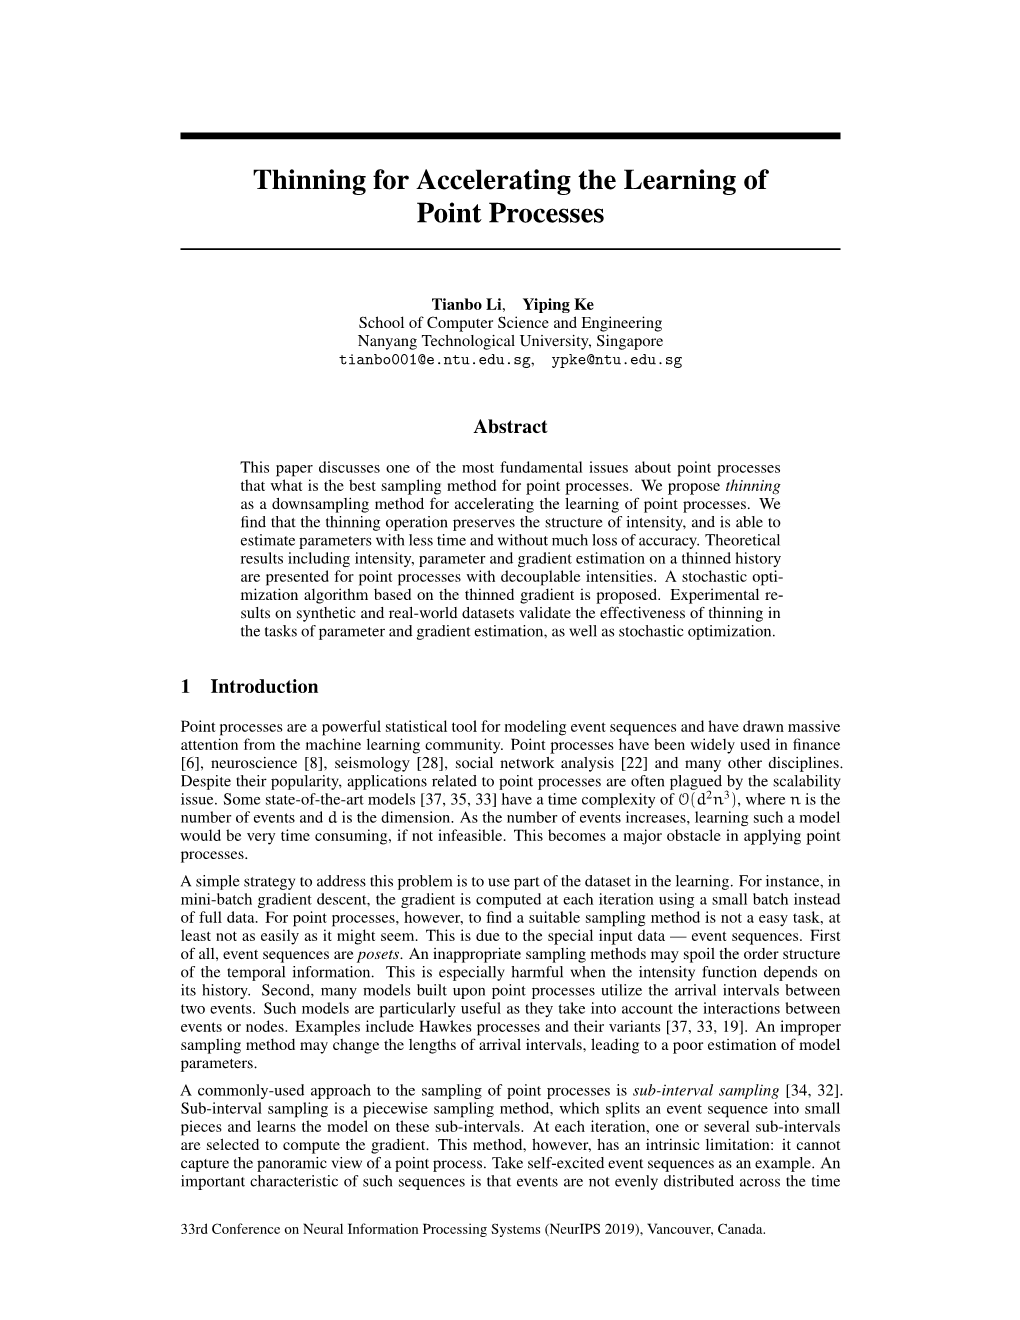 Thinning for Accelerating the Learning of Point Processes